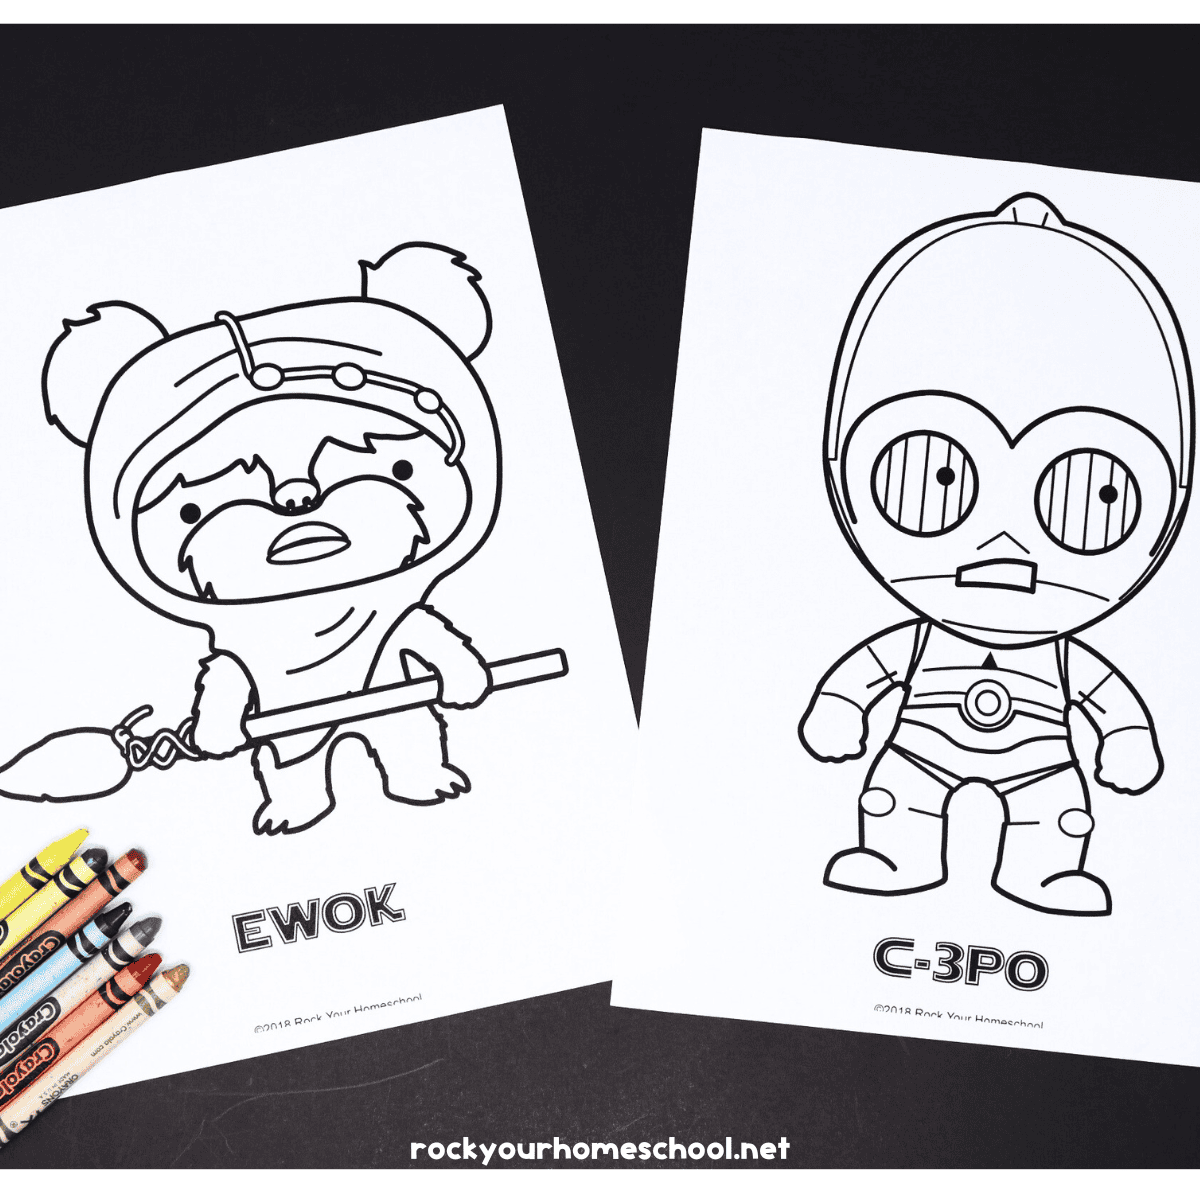 Examples of free printable Star Wars coloring pages featuring Ewok and C-3PO.